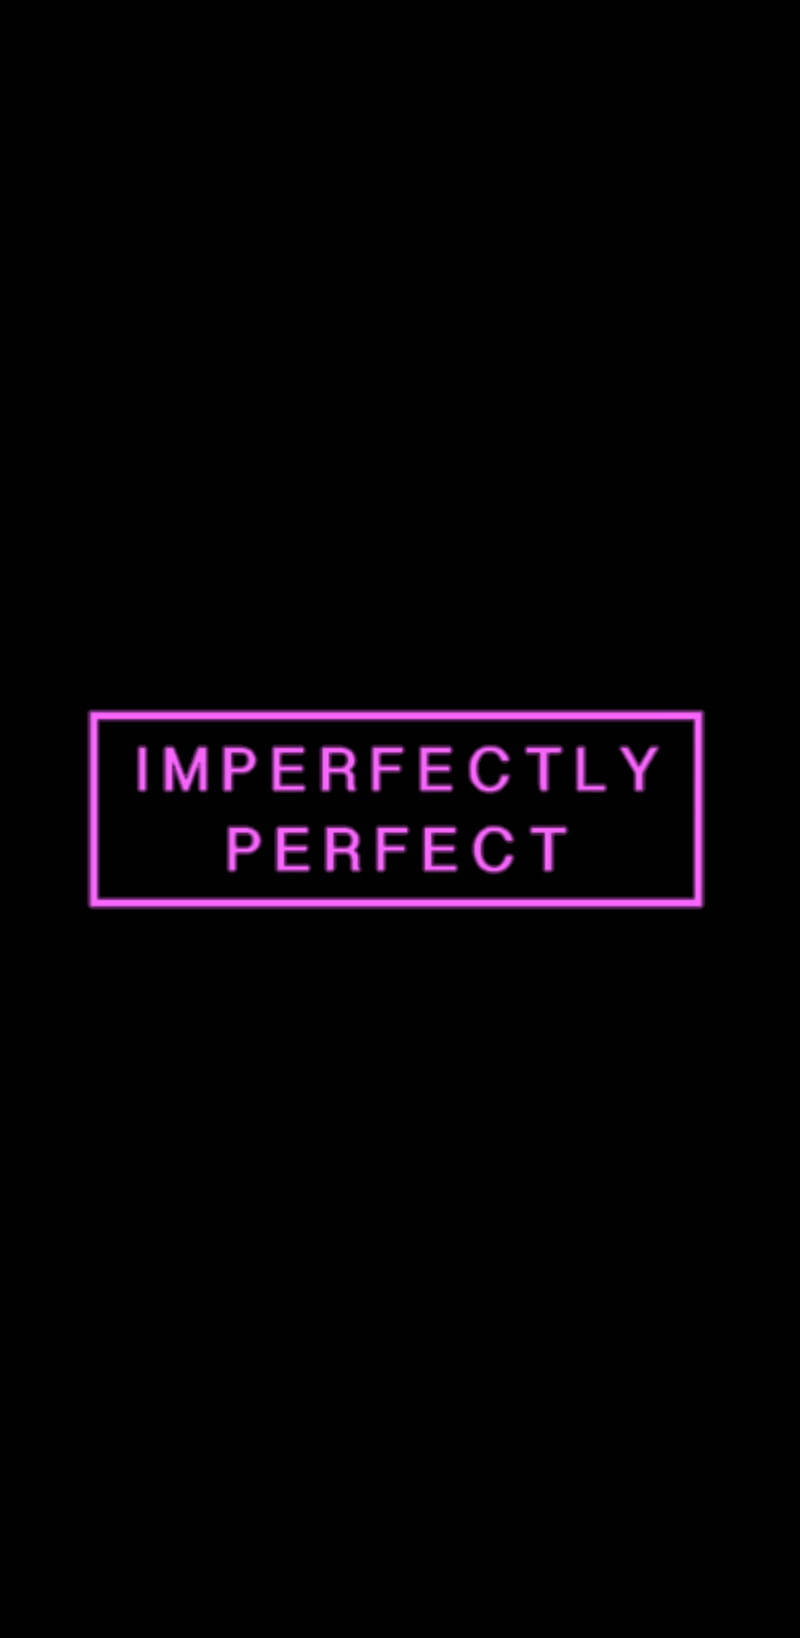 Dark Theme Pink Neon Imperfectly Perfect Background